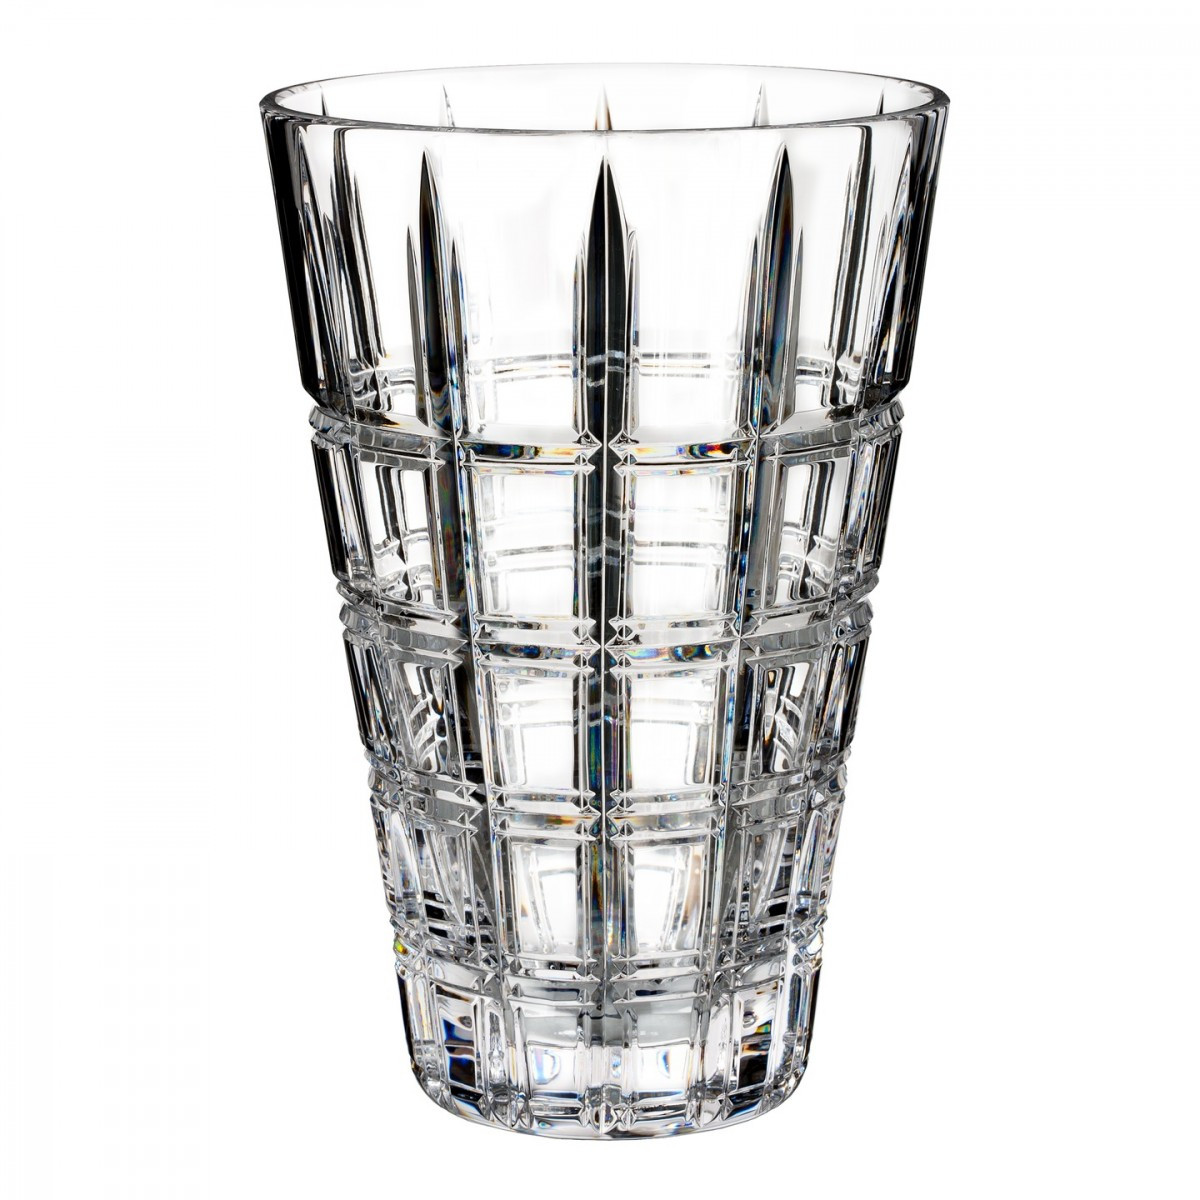 25 Fashionable Retired Waterford Crystal Vase Patterns 2022 free download retired waterford crystal vase patterns of crosby 9in vase marquis by waterford us within crosby 9in vase